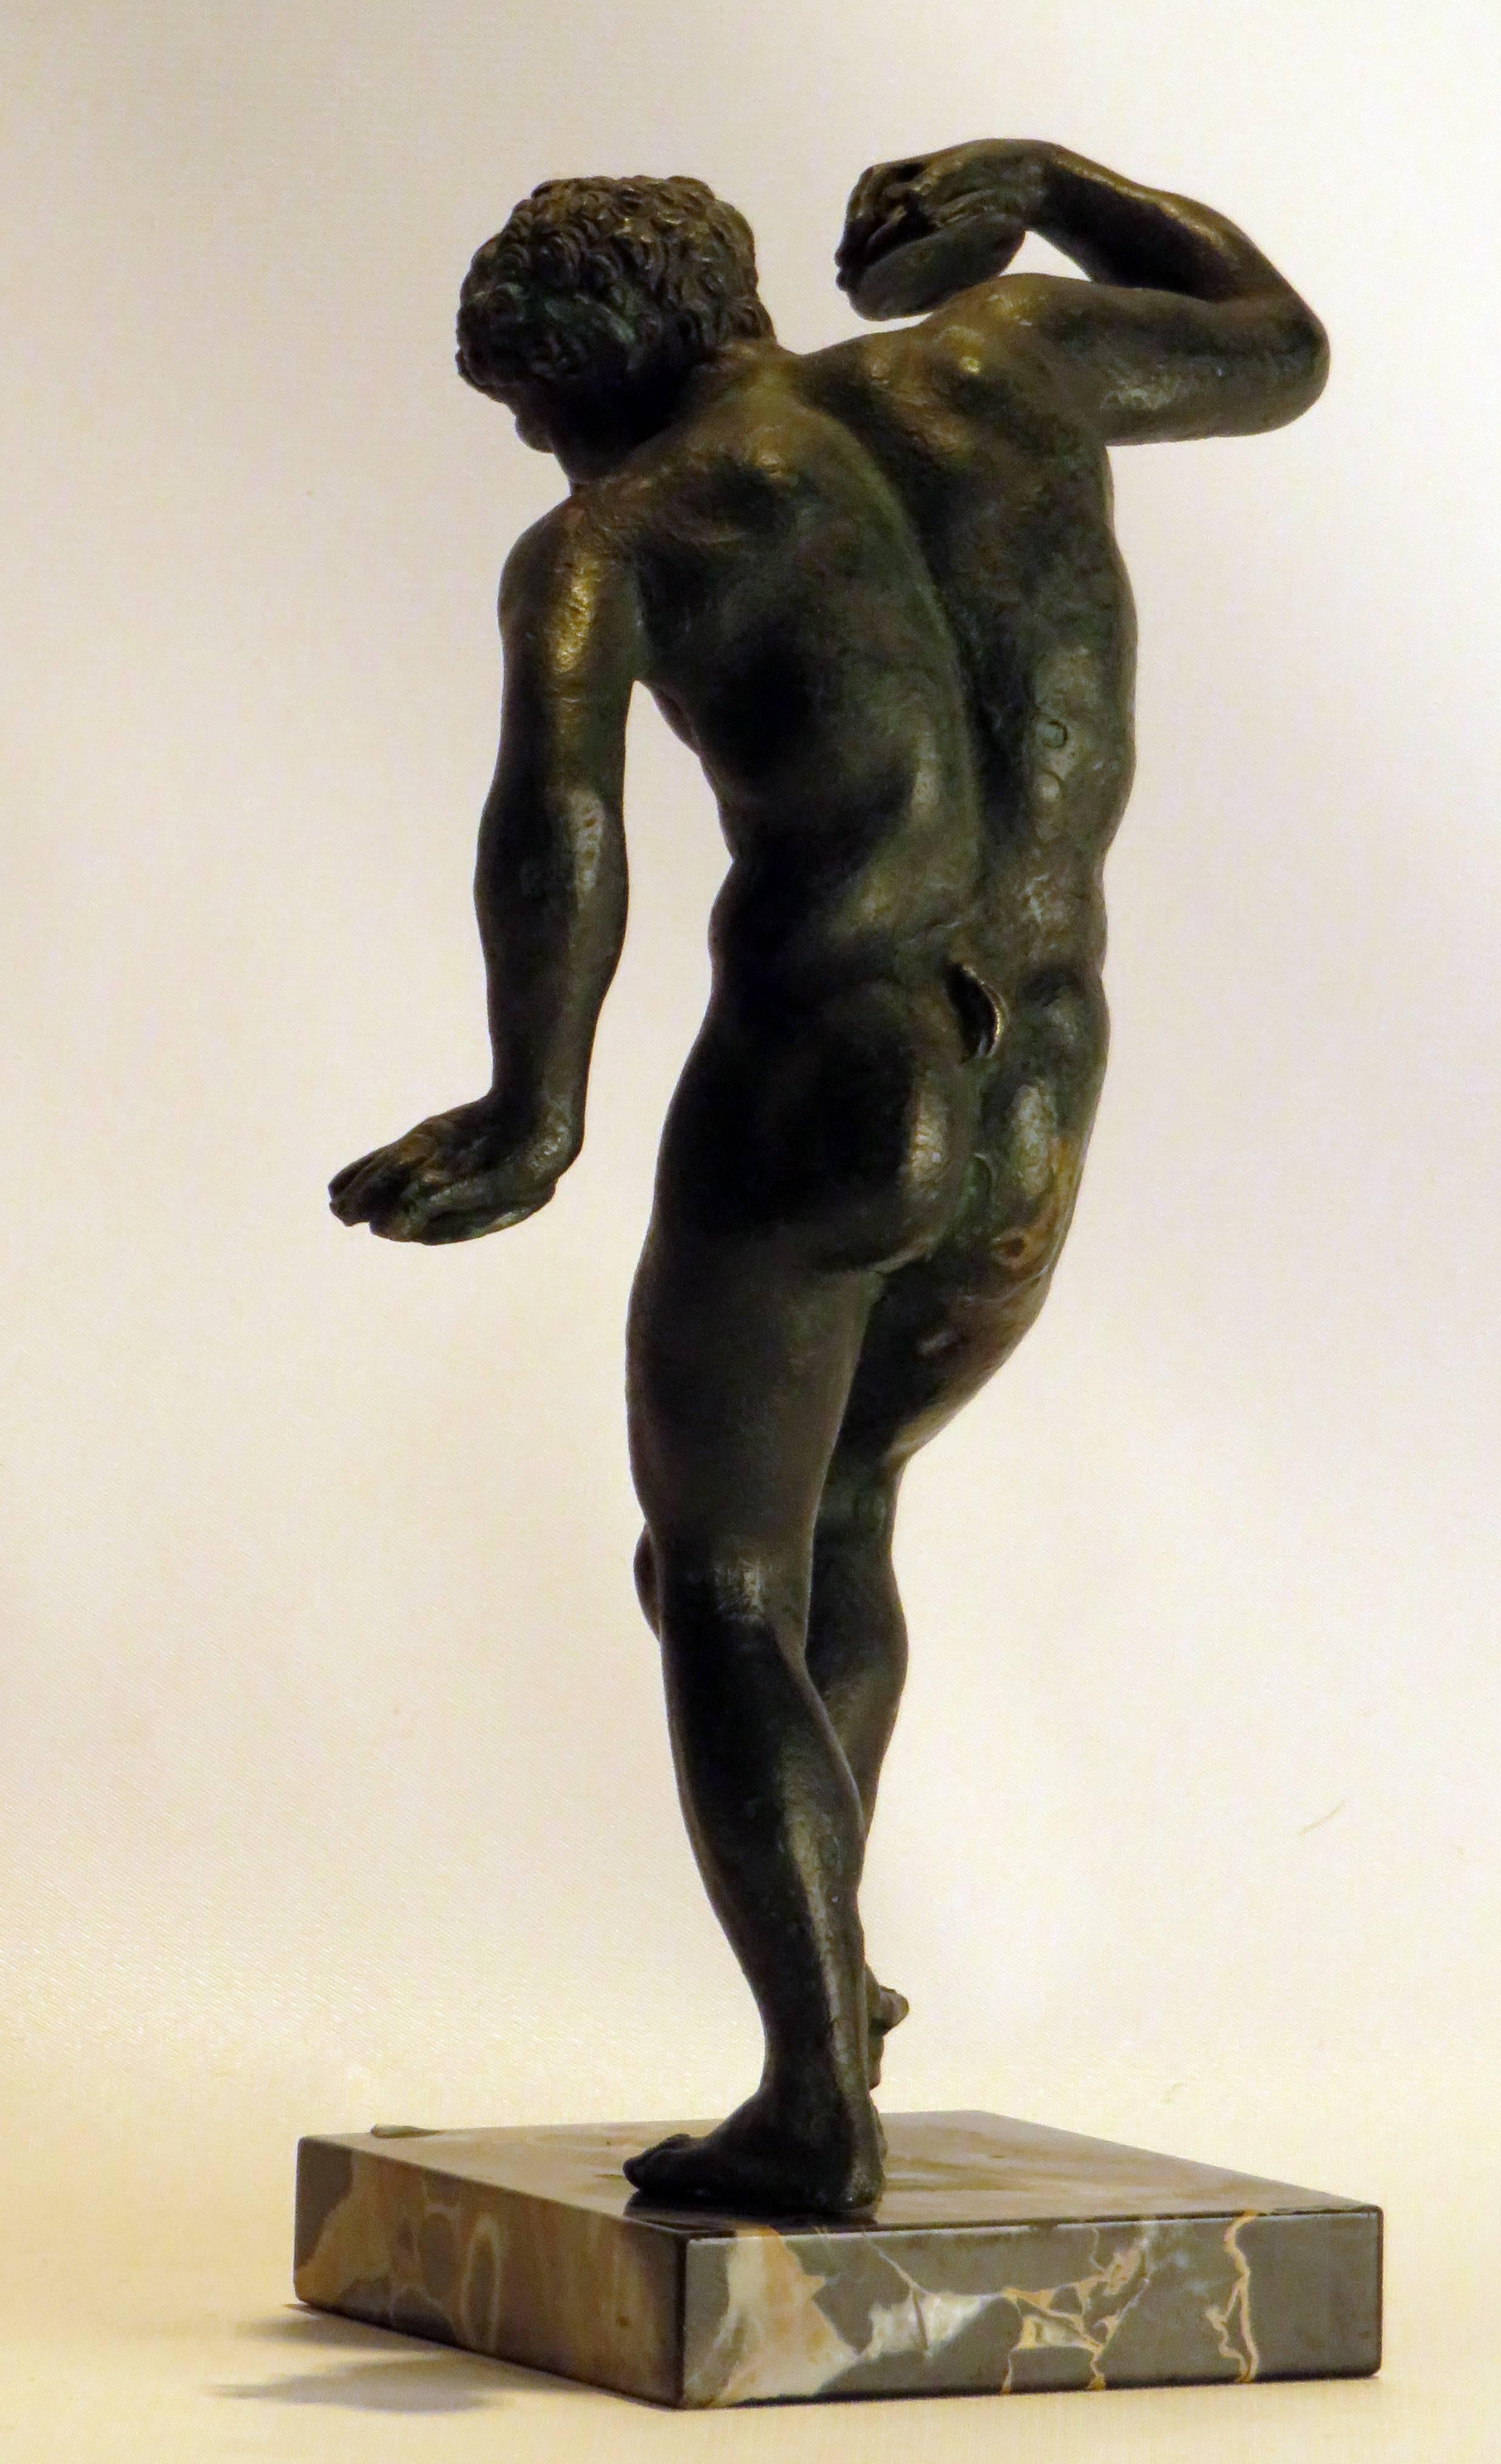 A handsome Grand Tour casting of a bronze Satyr playing cymbals while dancing. This statue was made in ancient Rome and has been a treasured souvenir for centuries. Made in Italy, circa 1880 on a marble base.